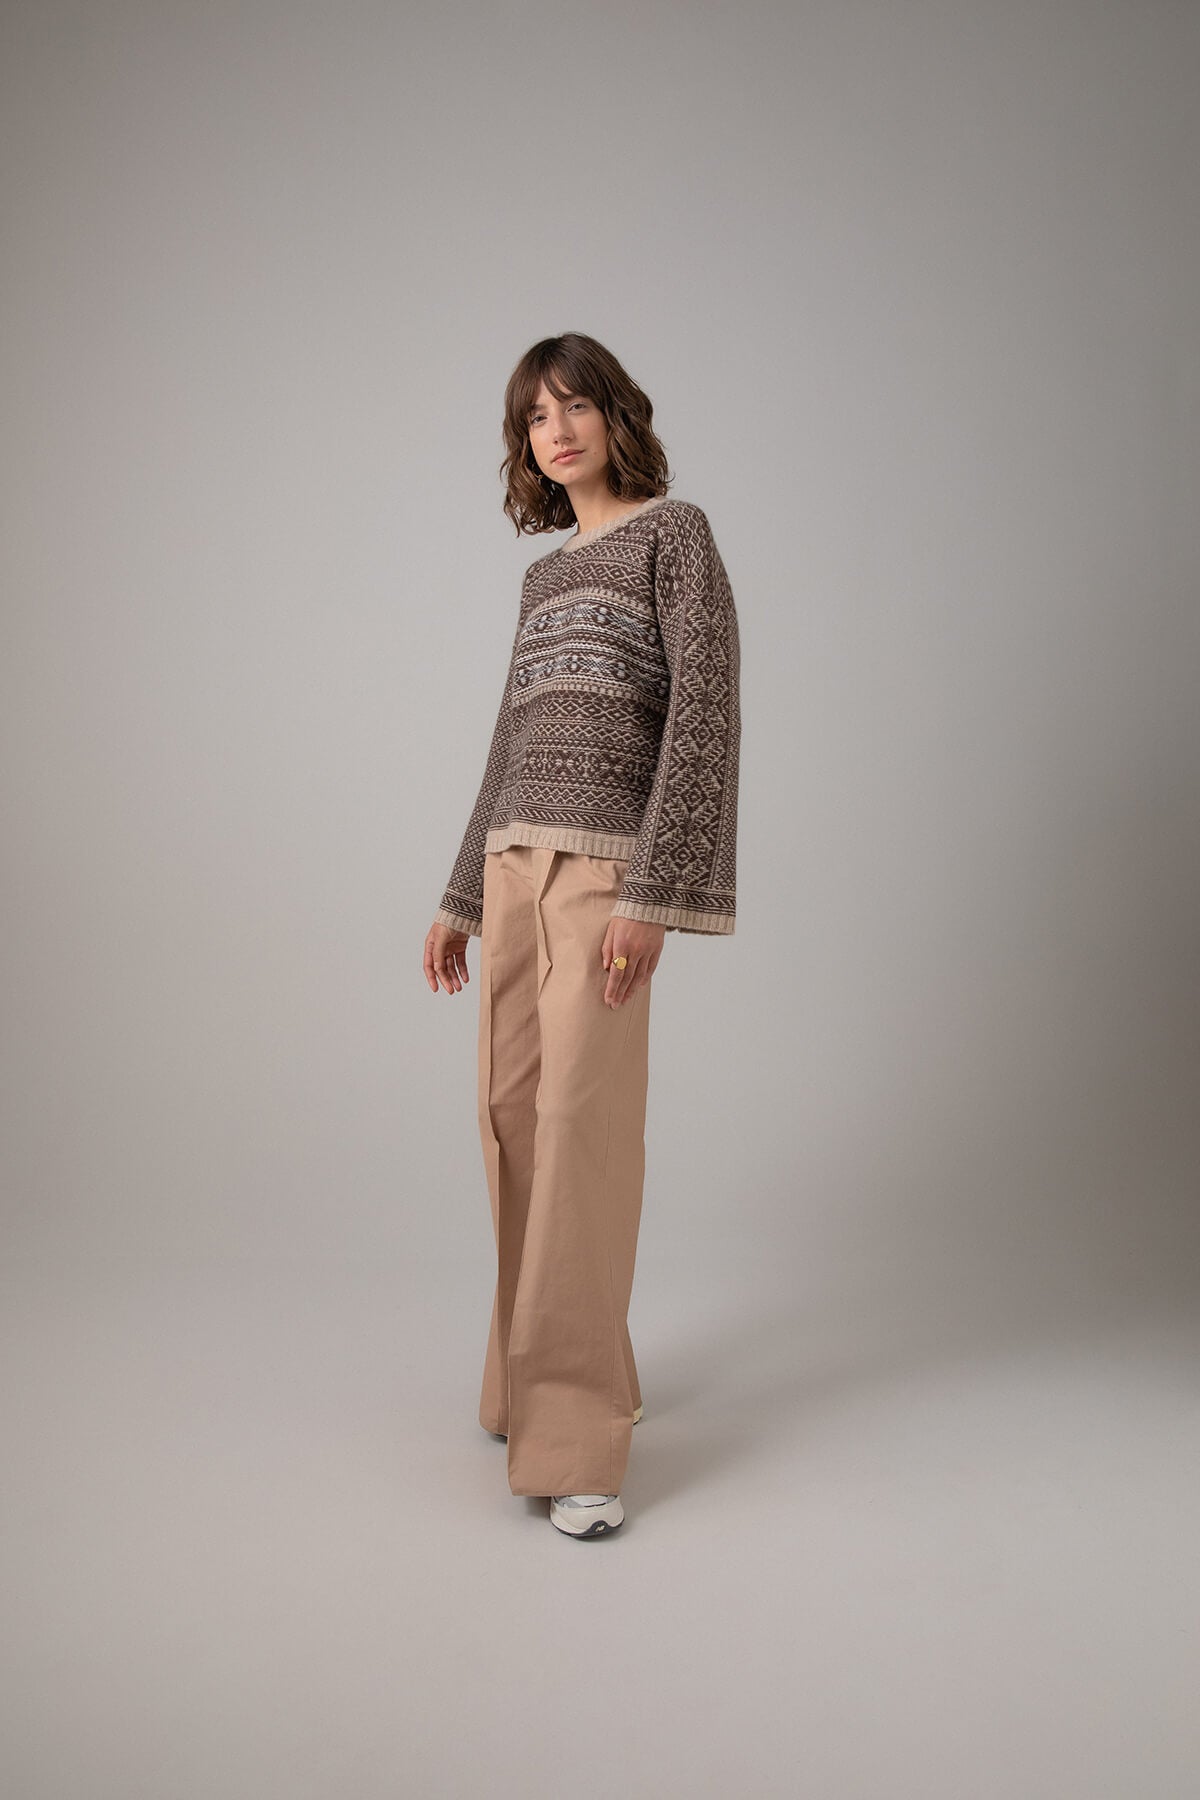 Johnstons of Elgin Women's Round Neck Traditional Sanquhar Fairisle Cashmere Sweater in Oatmeal worn with Camel Trousers on a grey background KAC05099Q23724